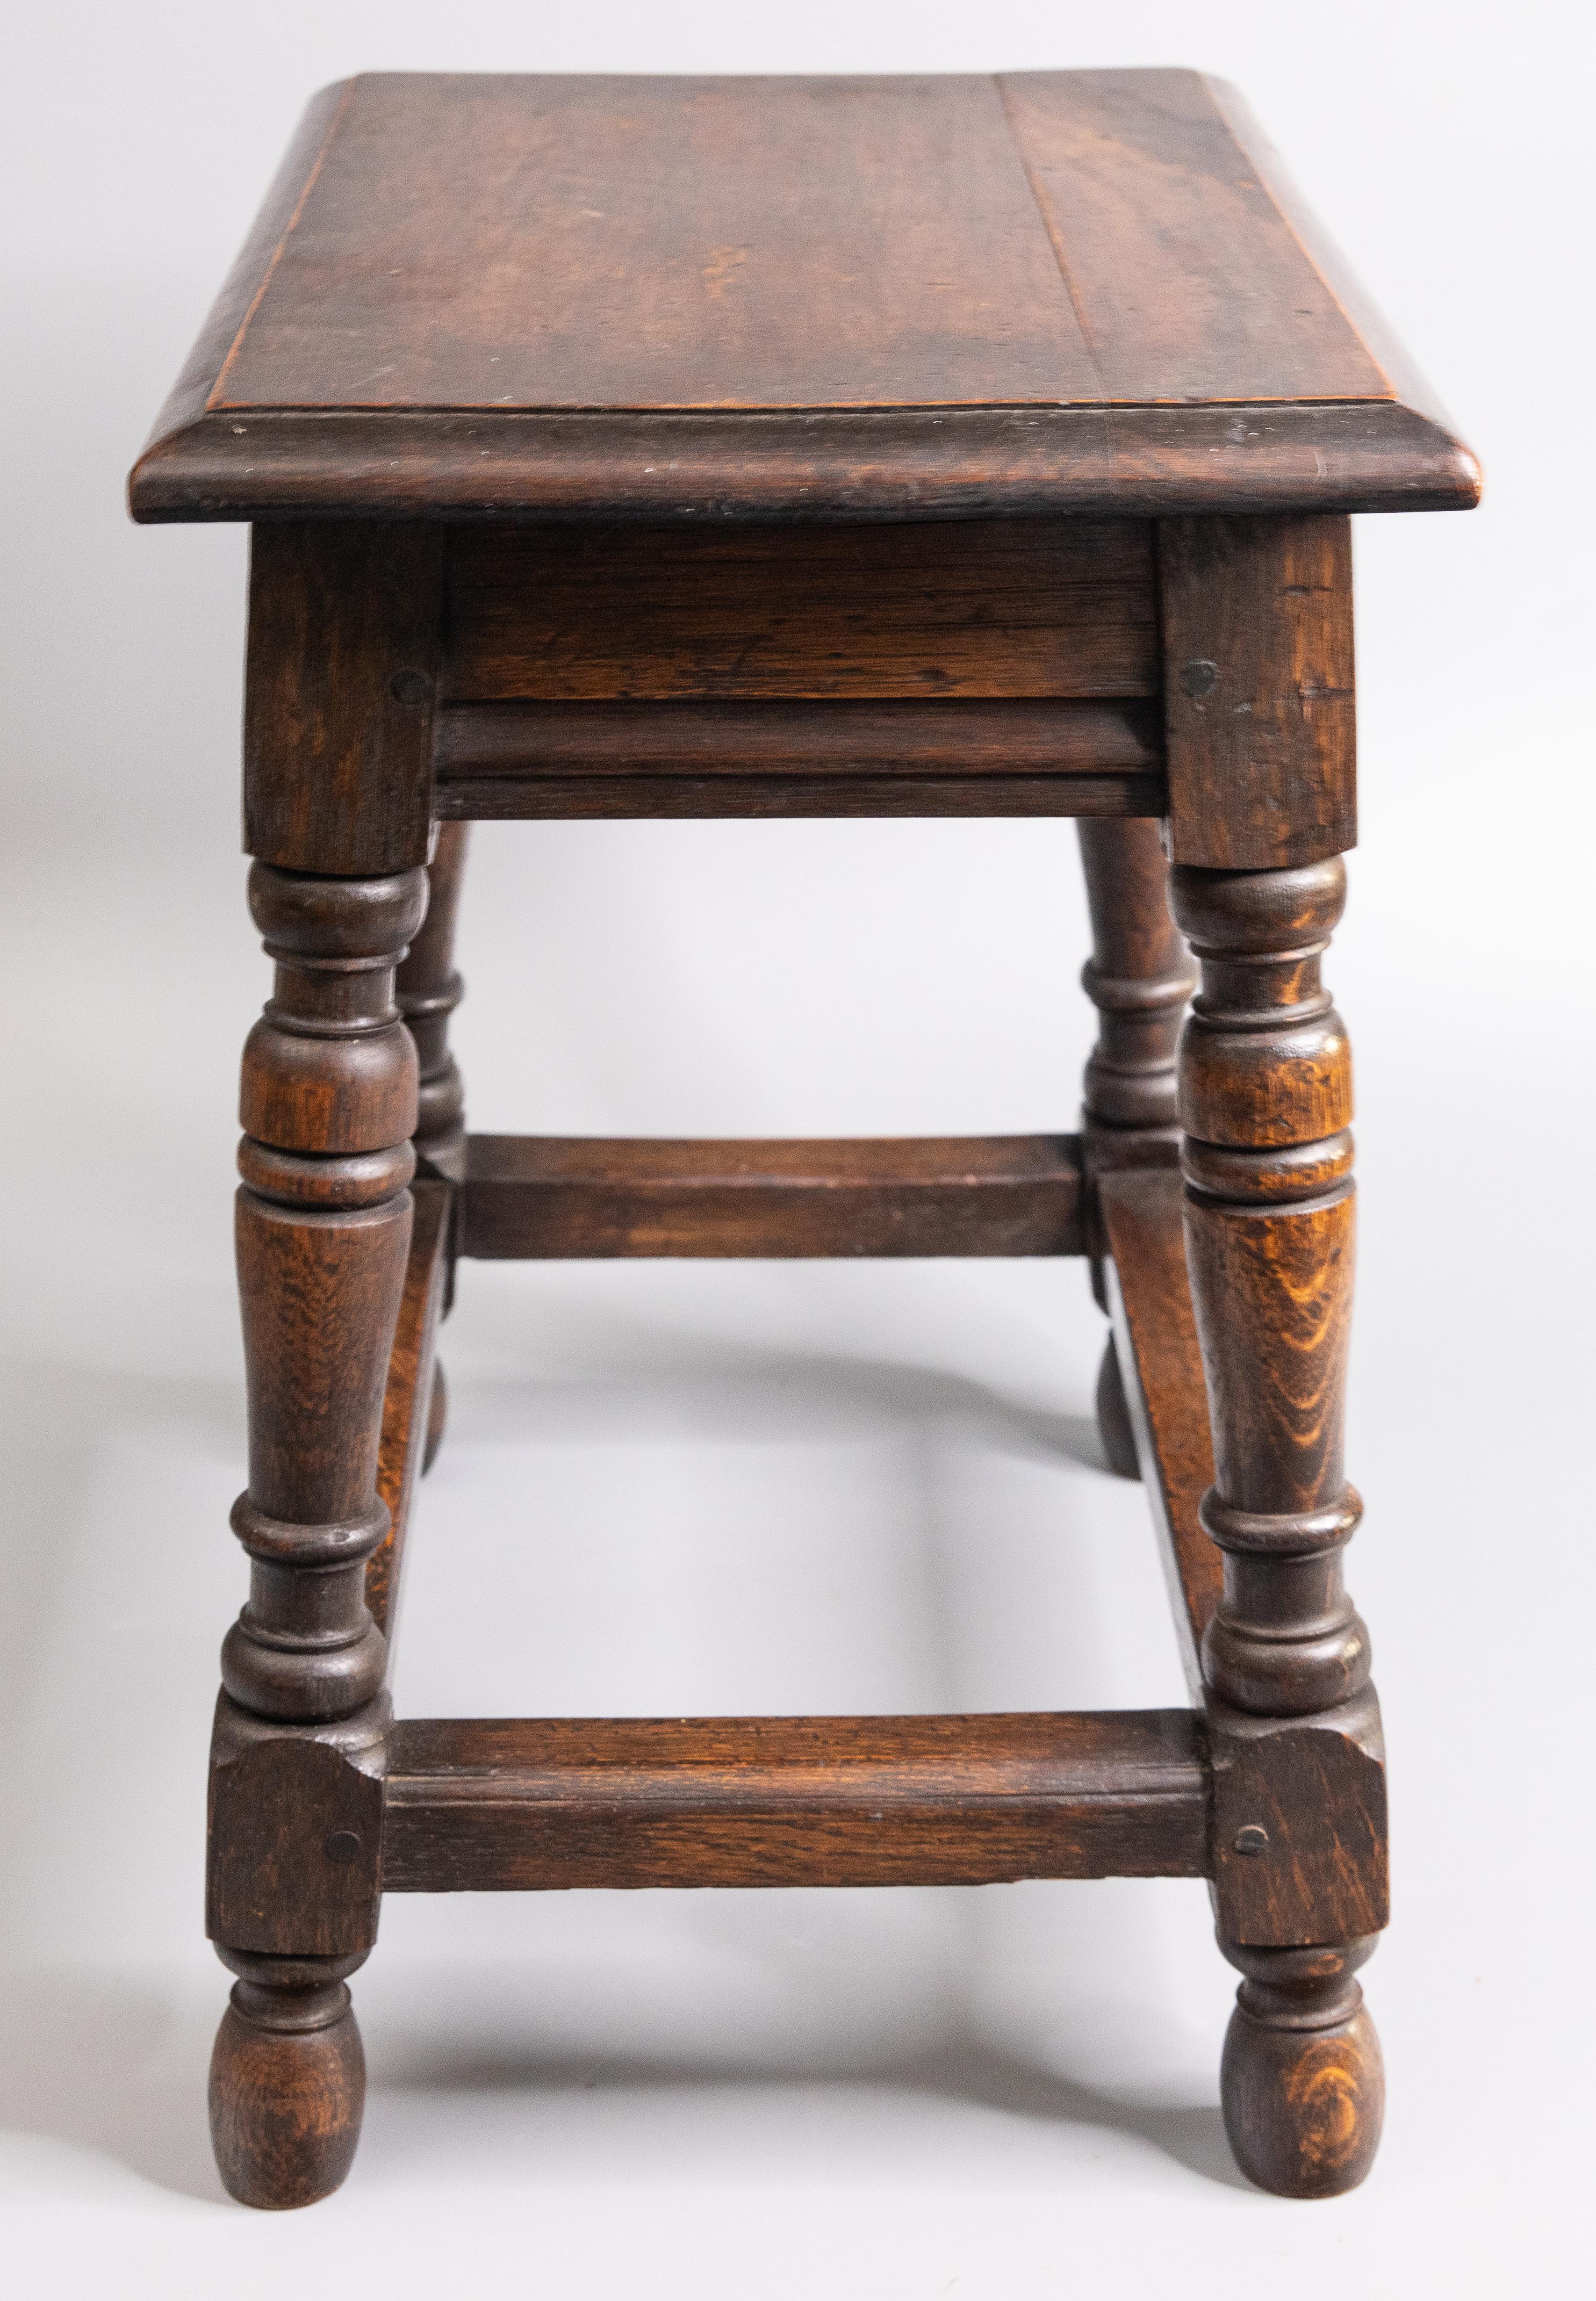 19th Century English Oak Pegged Joint Stool Side Table 1